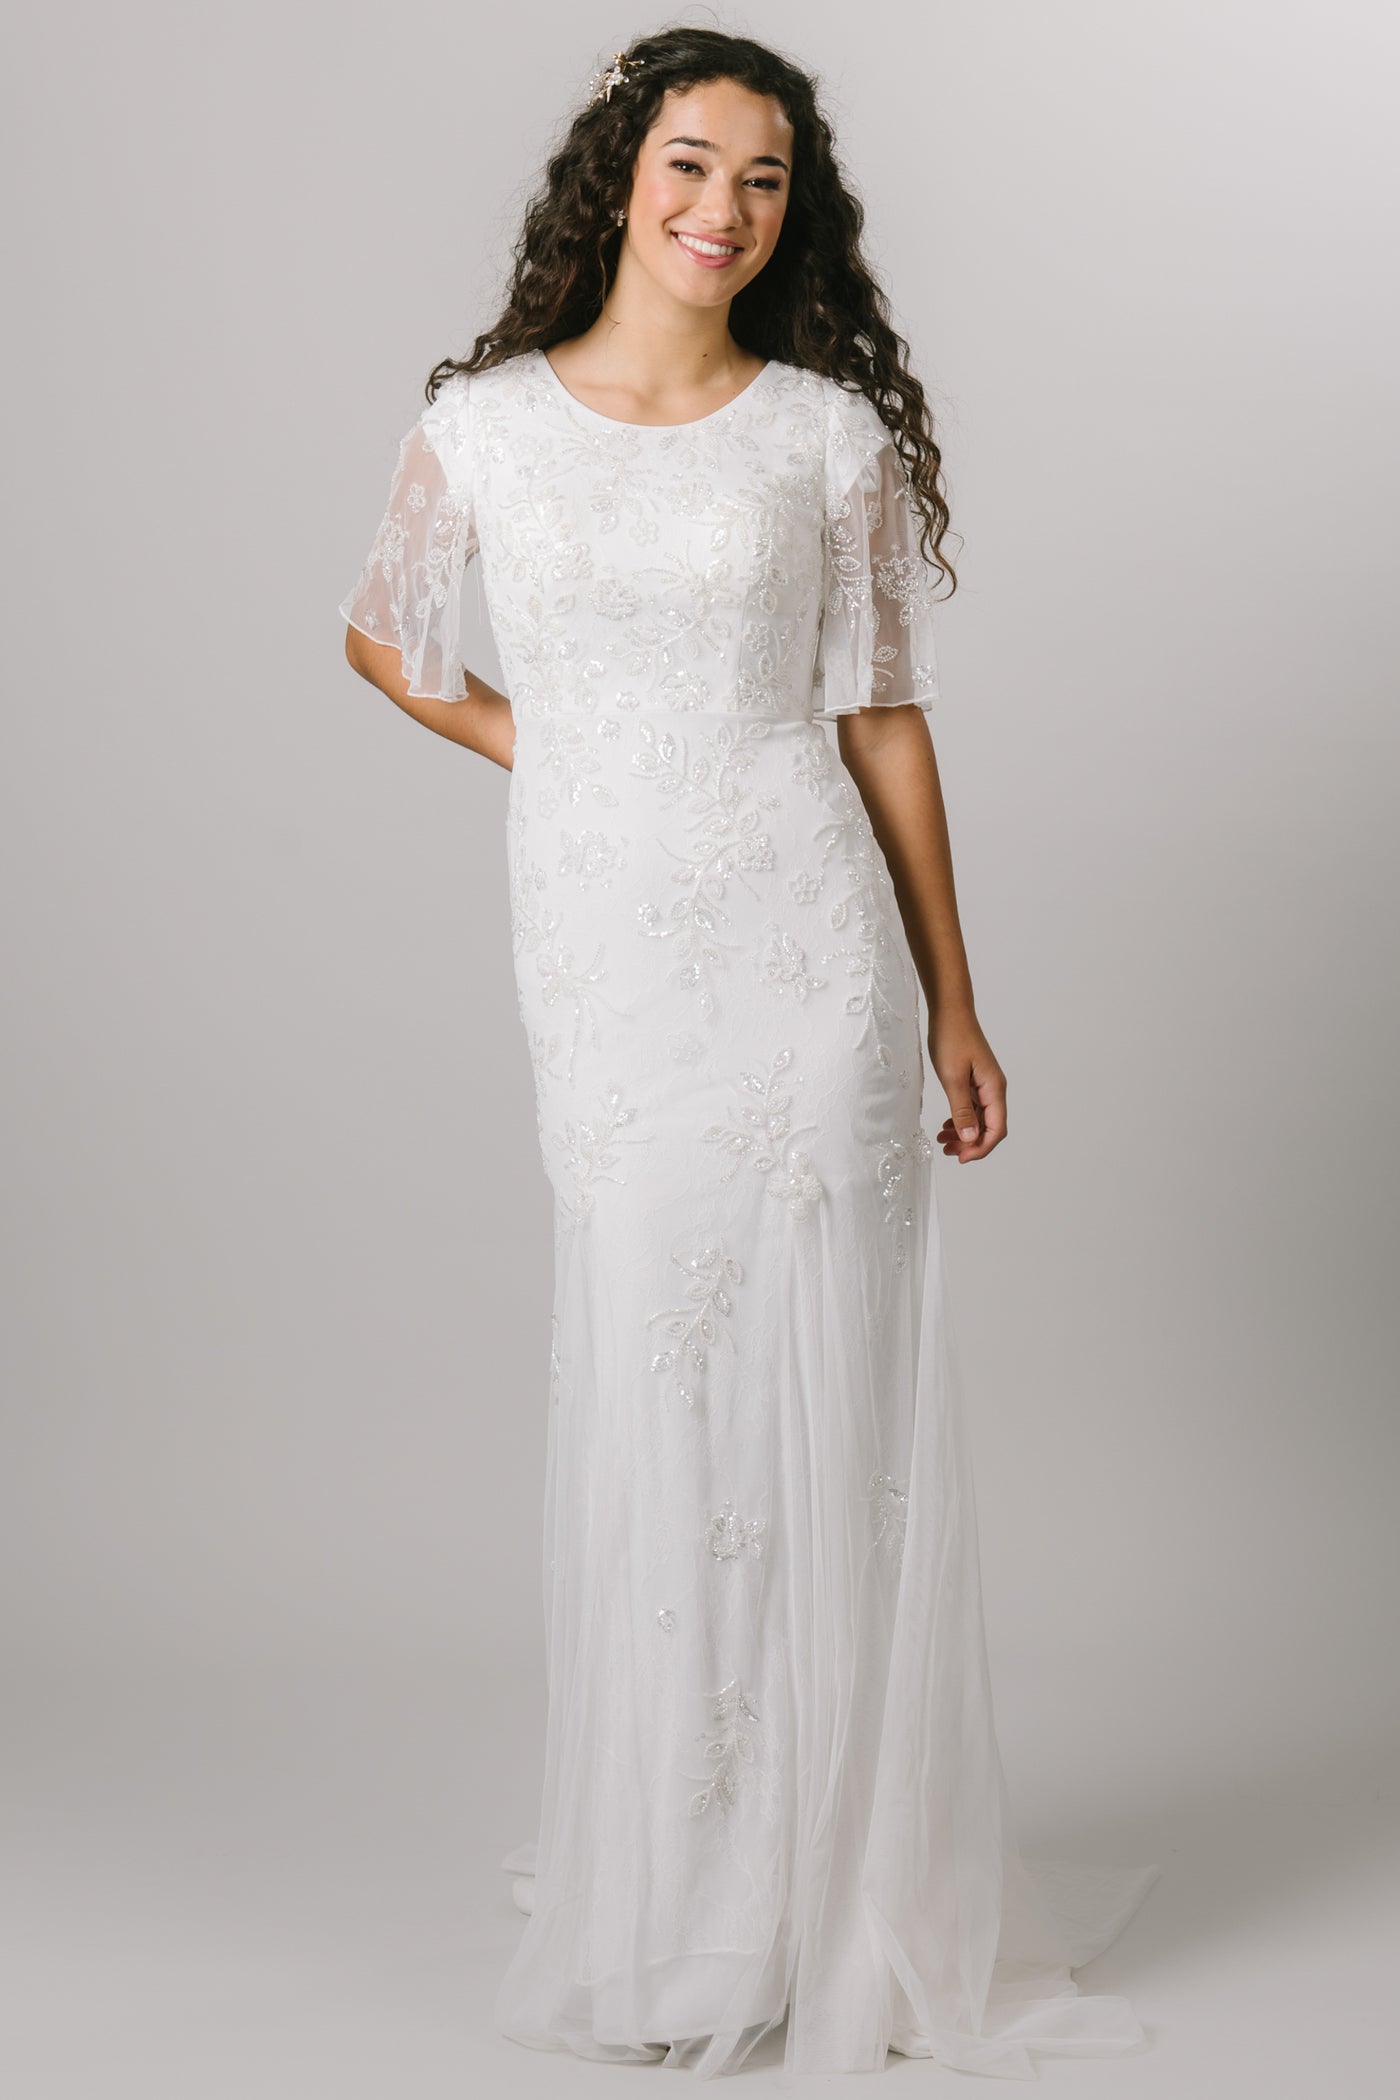 This modest wedding dress features a beaded applique that fades into the skirt and flutter sleeves. It also features a soft scoop neckline and a slim, fitted silhouette.